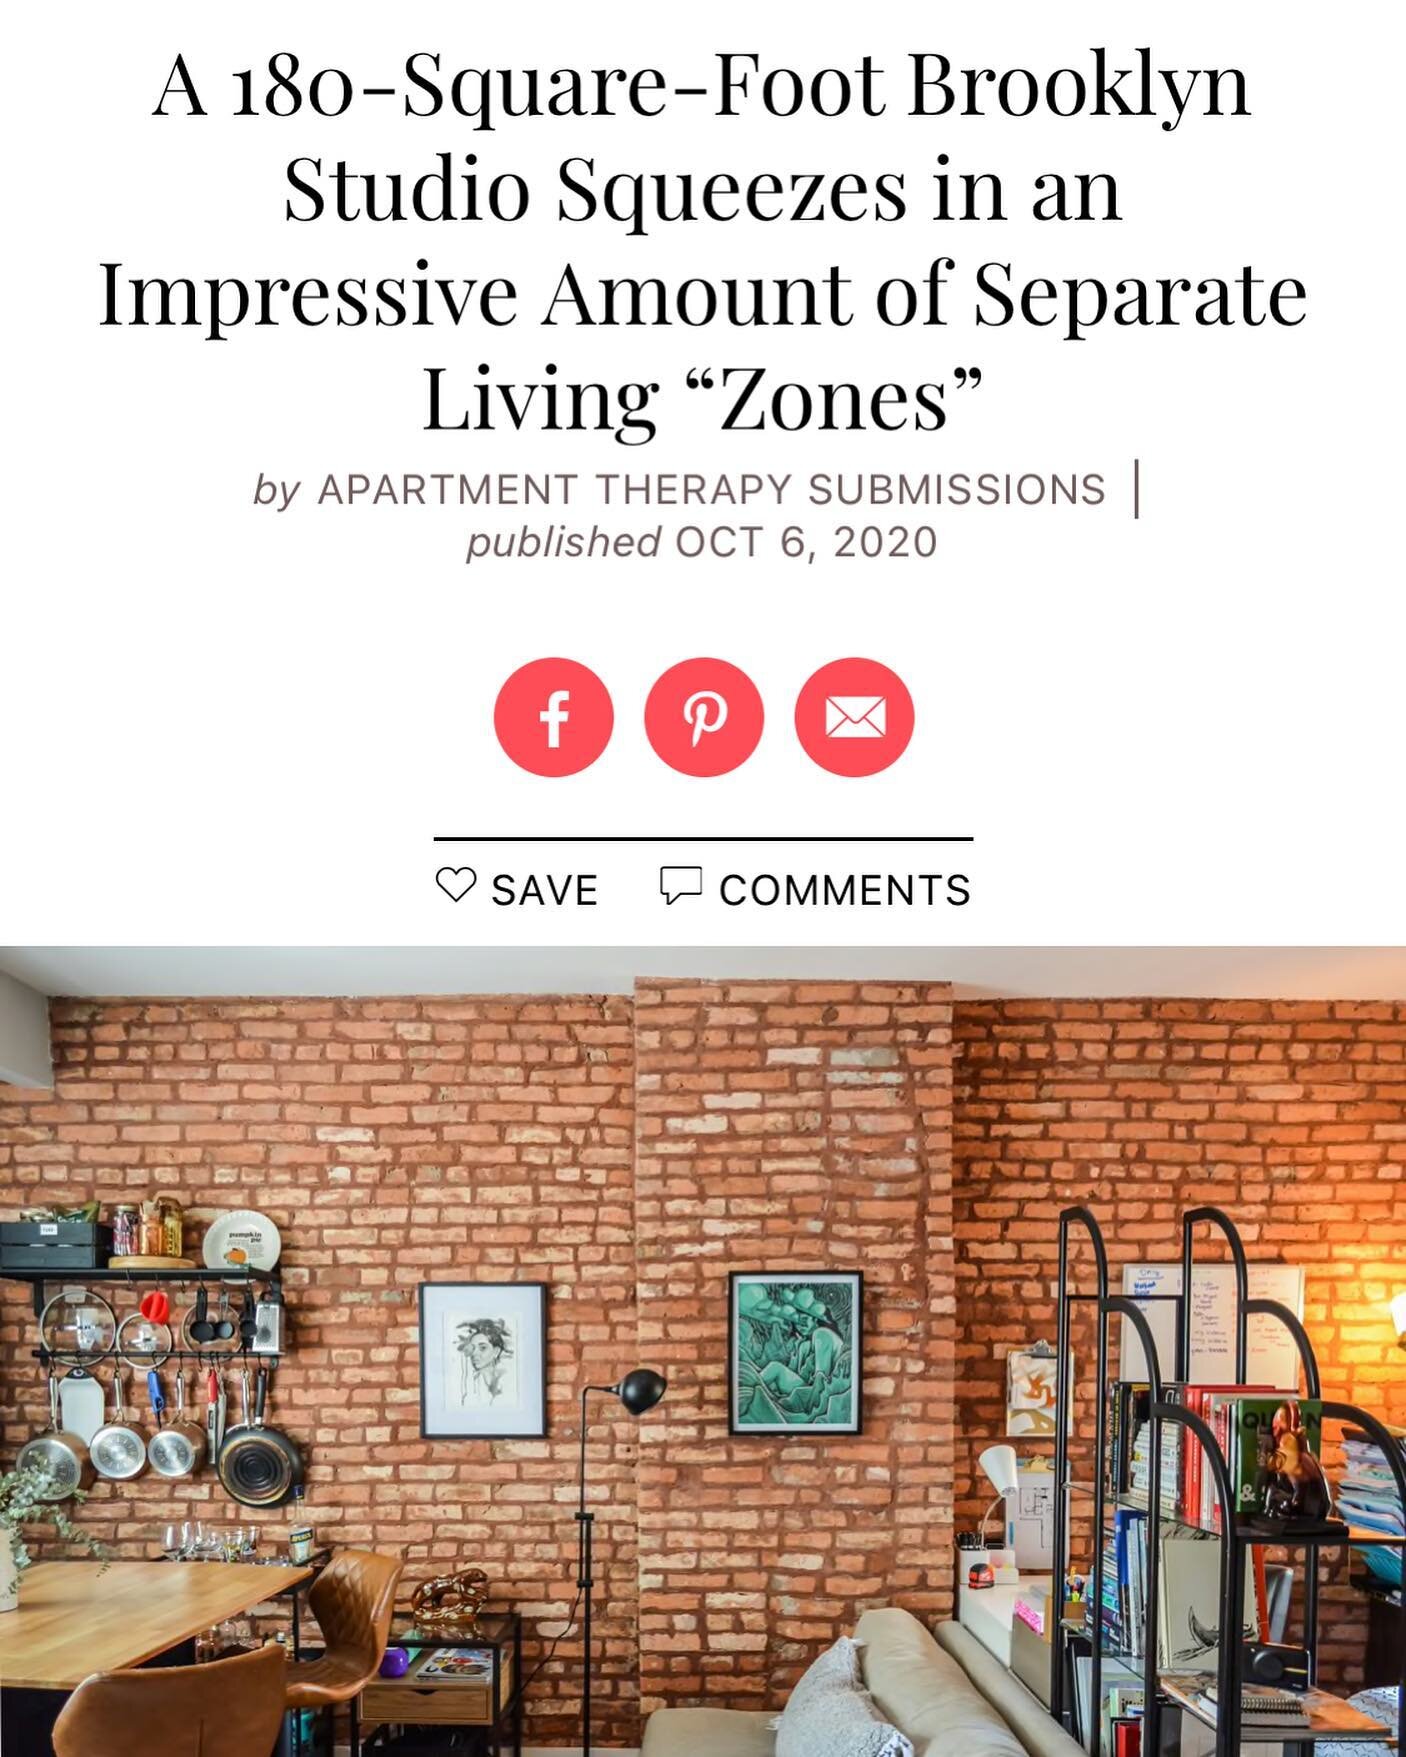 Still honored and humbled to be featured!! Thank you @apartmenttherapy I would love to do a tiny tour if possible! Link in bio!

#interiordesign #interiordesigner #homedecor #studio #tinyapartment #tinyapartmentliving #brick #brickwall #livingroomdes